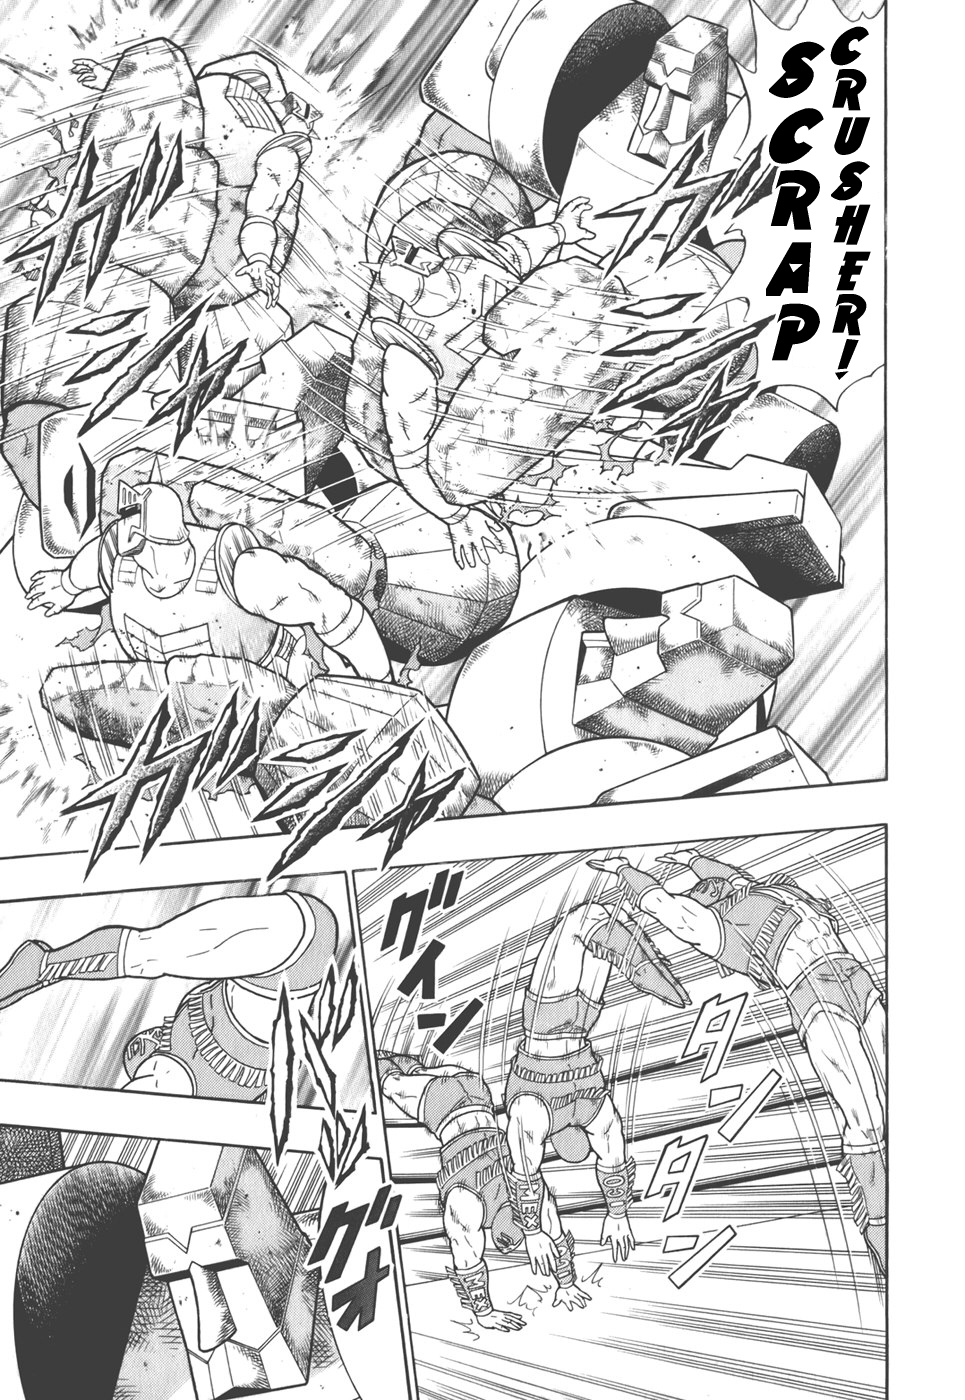 Kinnikuman Nisei: Ultimate Chojin Tag Vol. 4 Ch. 37 A New Generation United Front to Save Kevin!